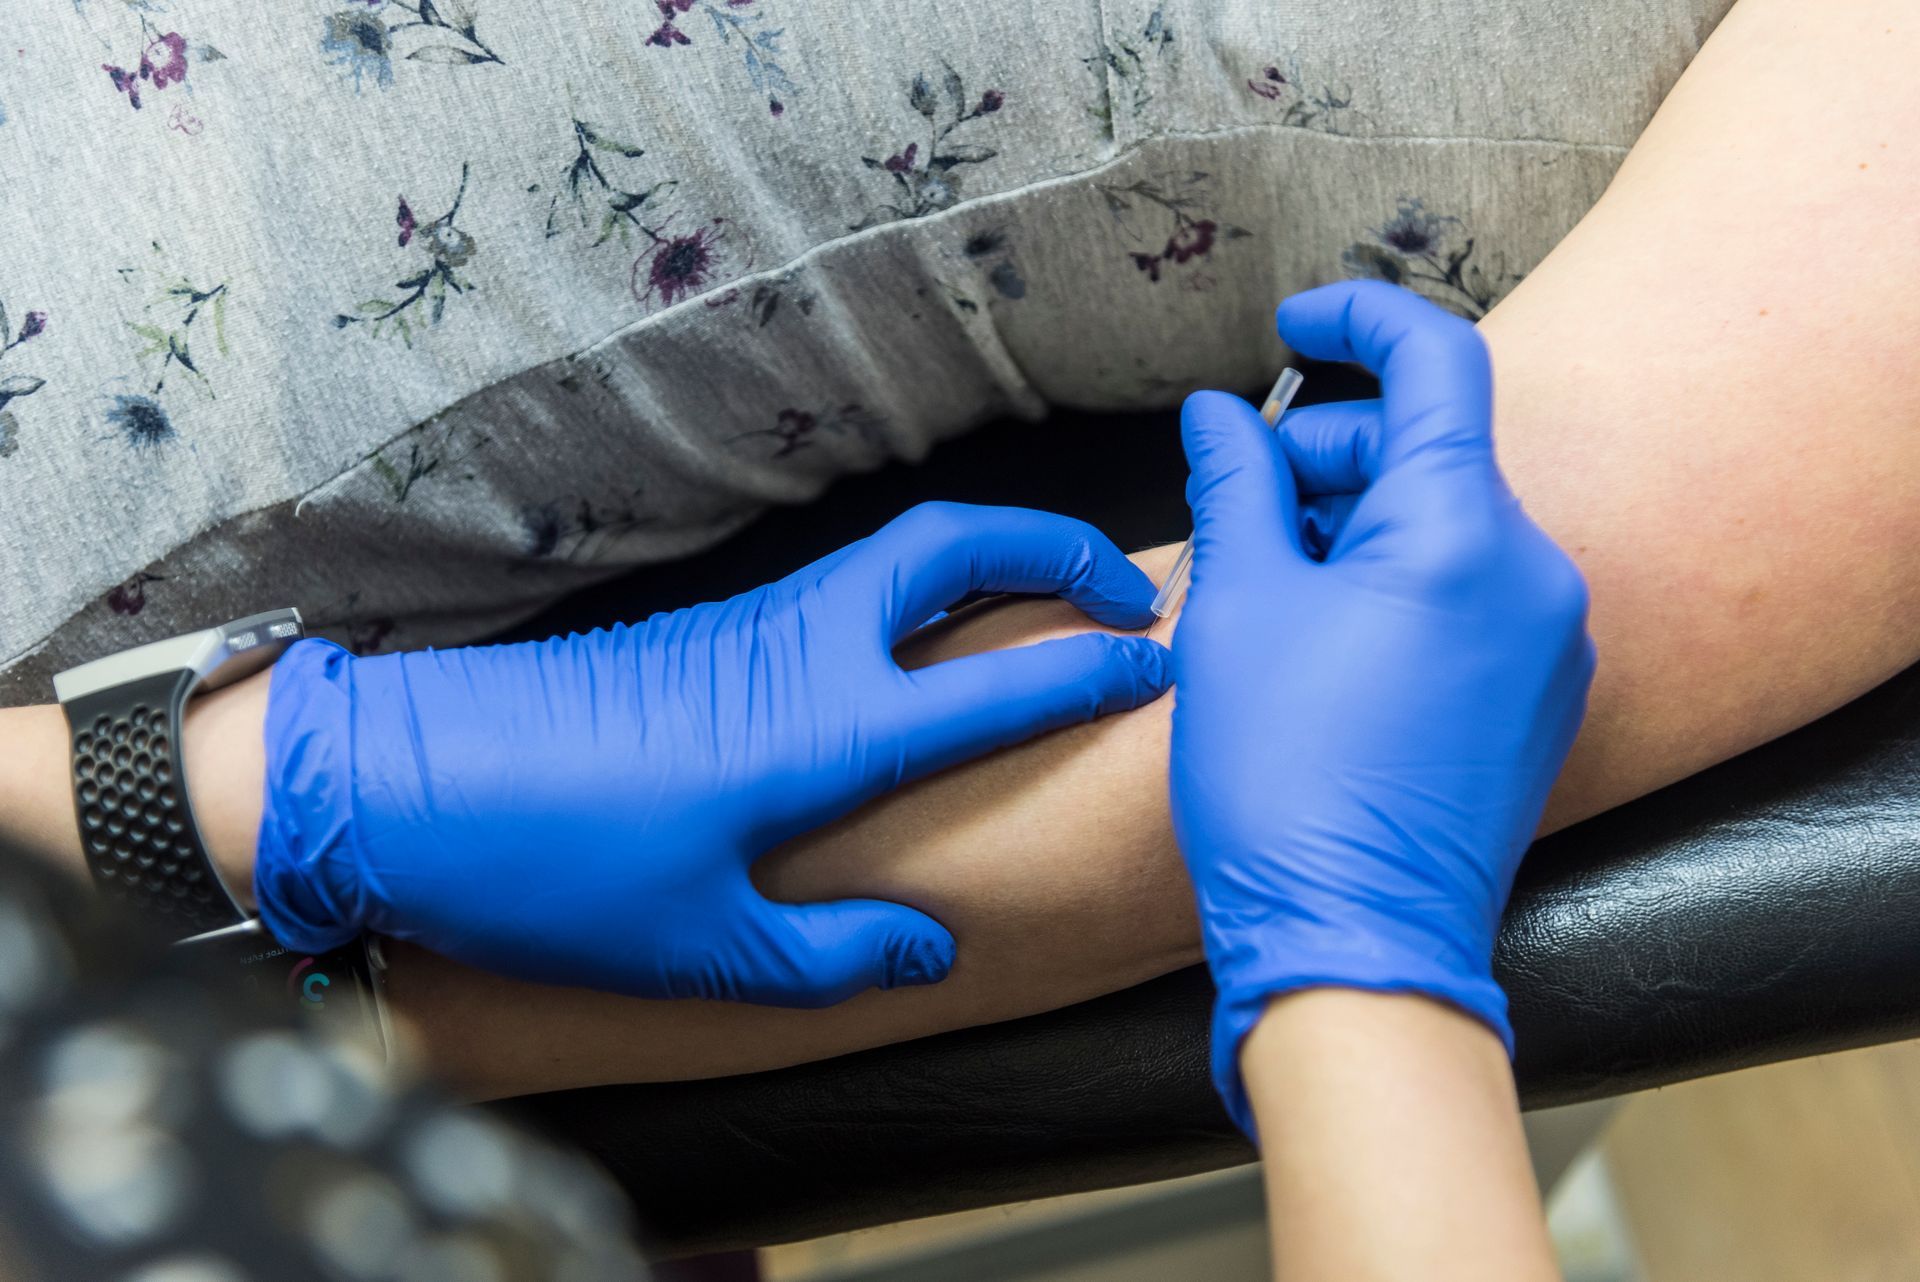 Modern Sports physiotherapist providing dry needling treatment to patient's arm